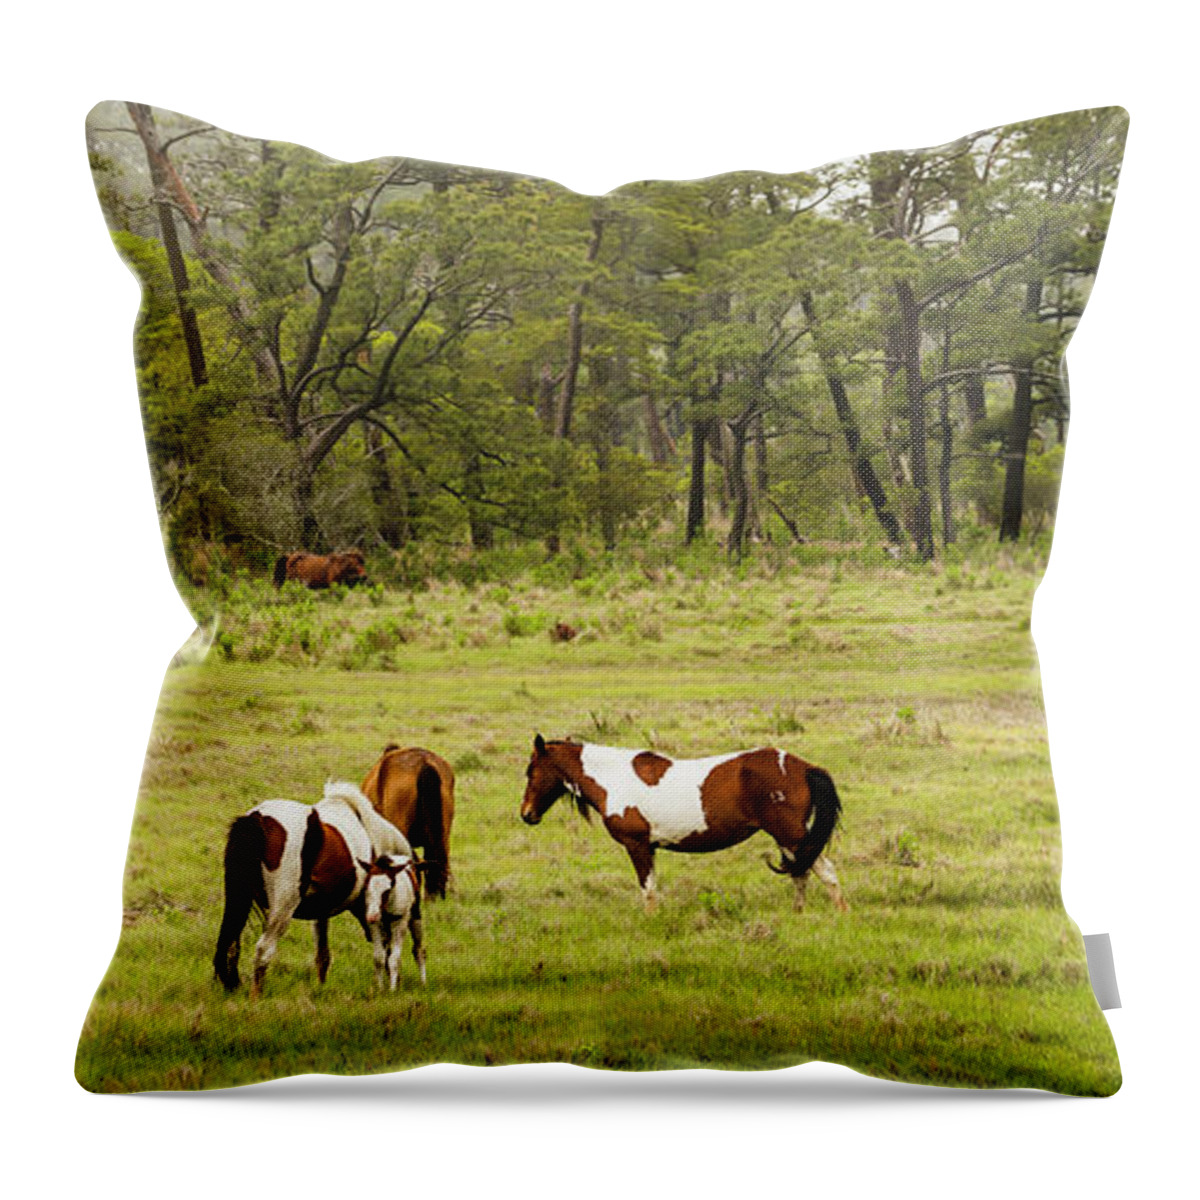 Chincoteague Throw Pillow featuring the photograph Chincoteague Pony Herd by Dale R Carlson